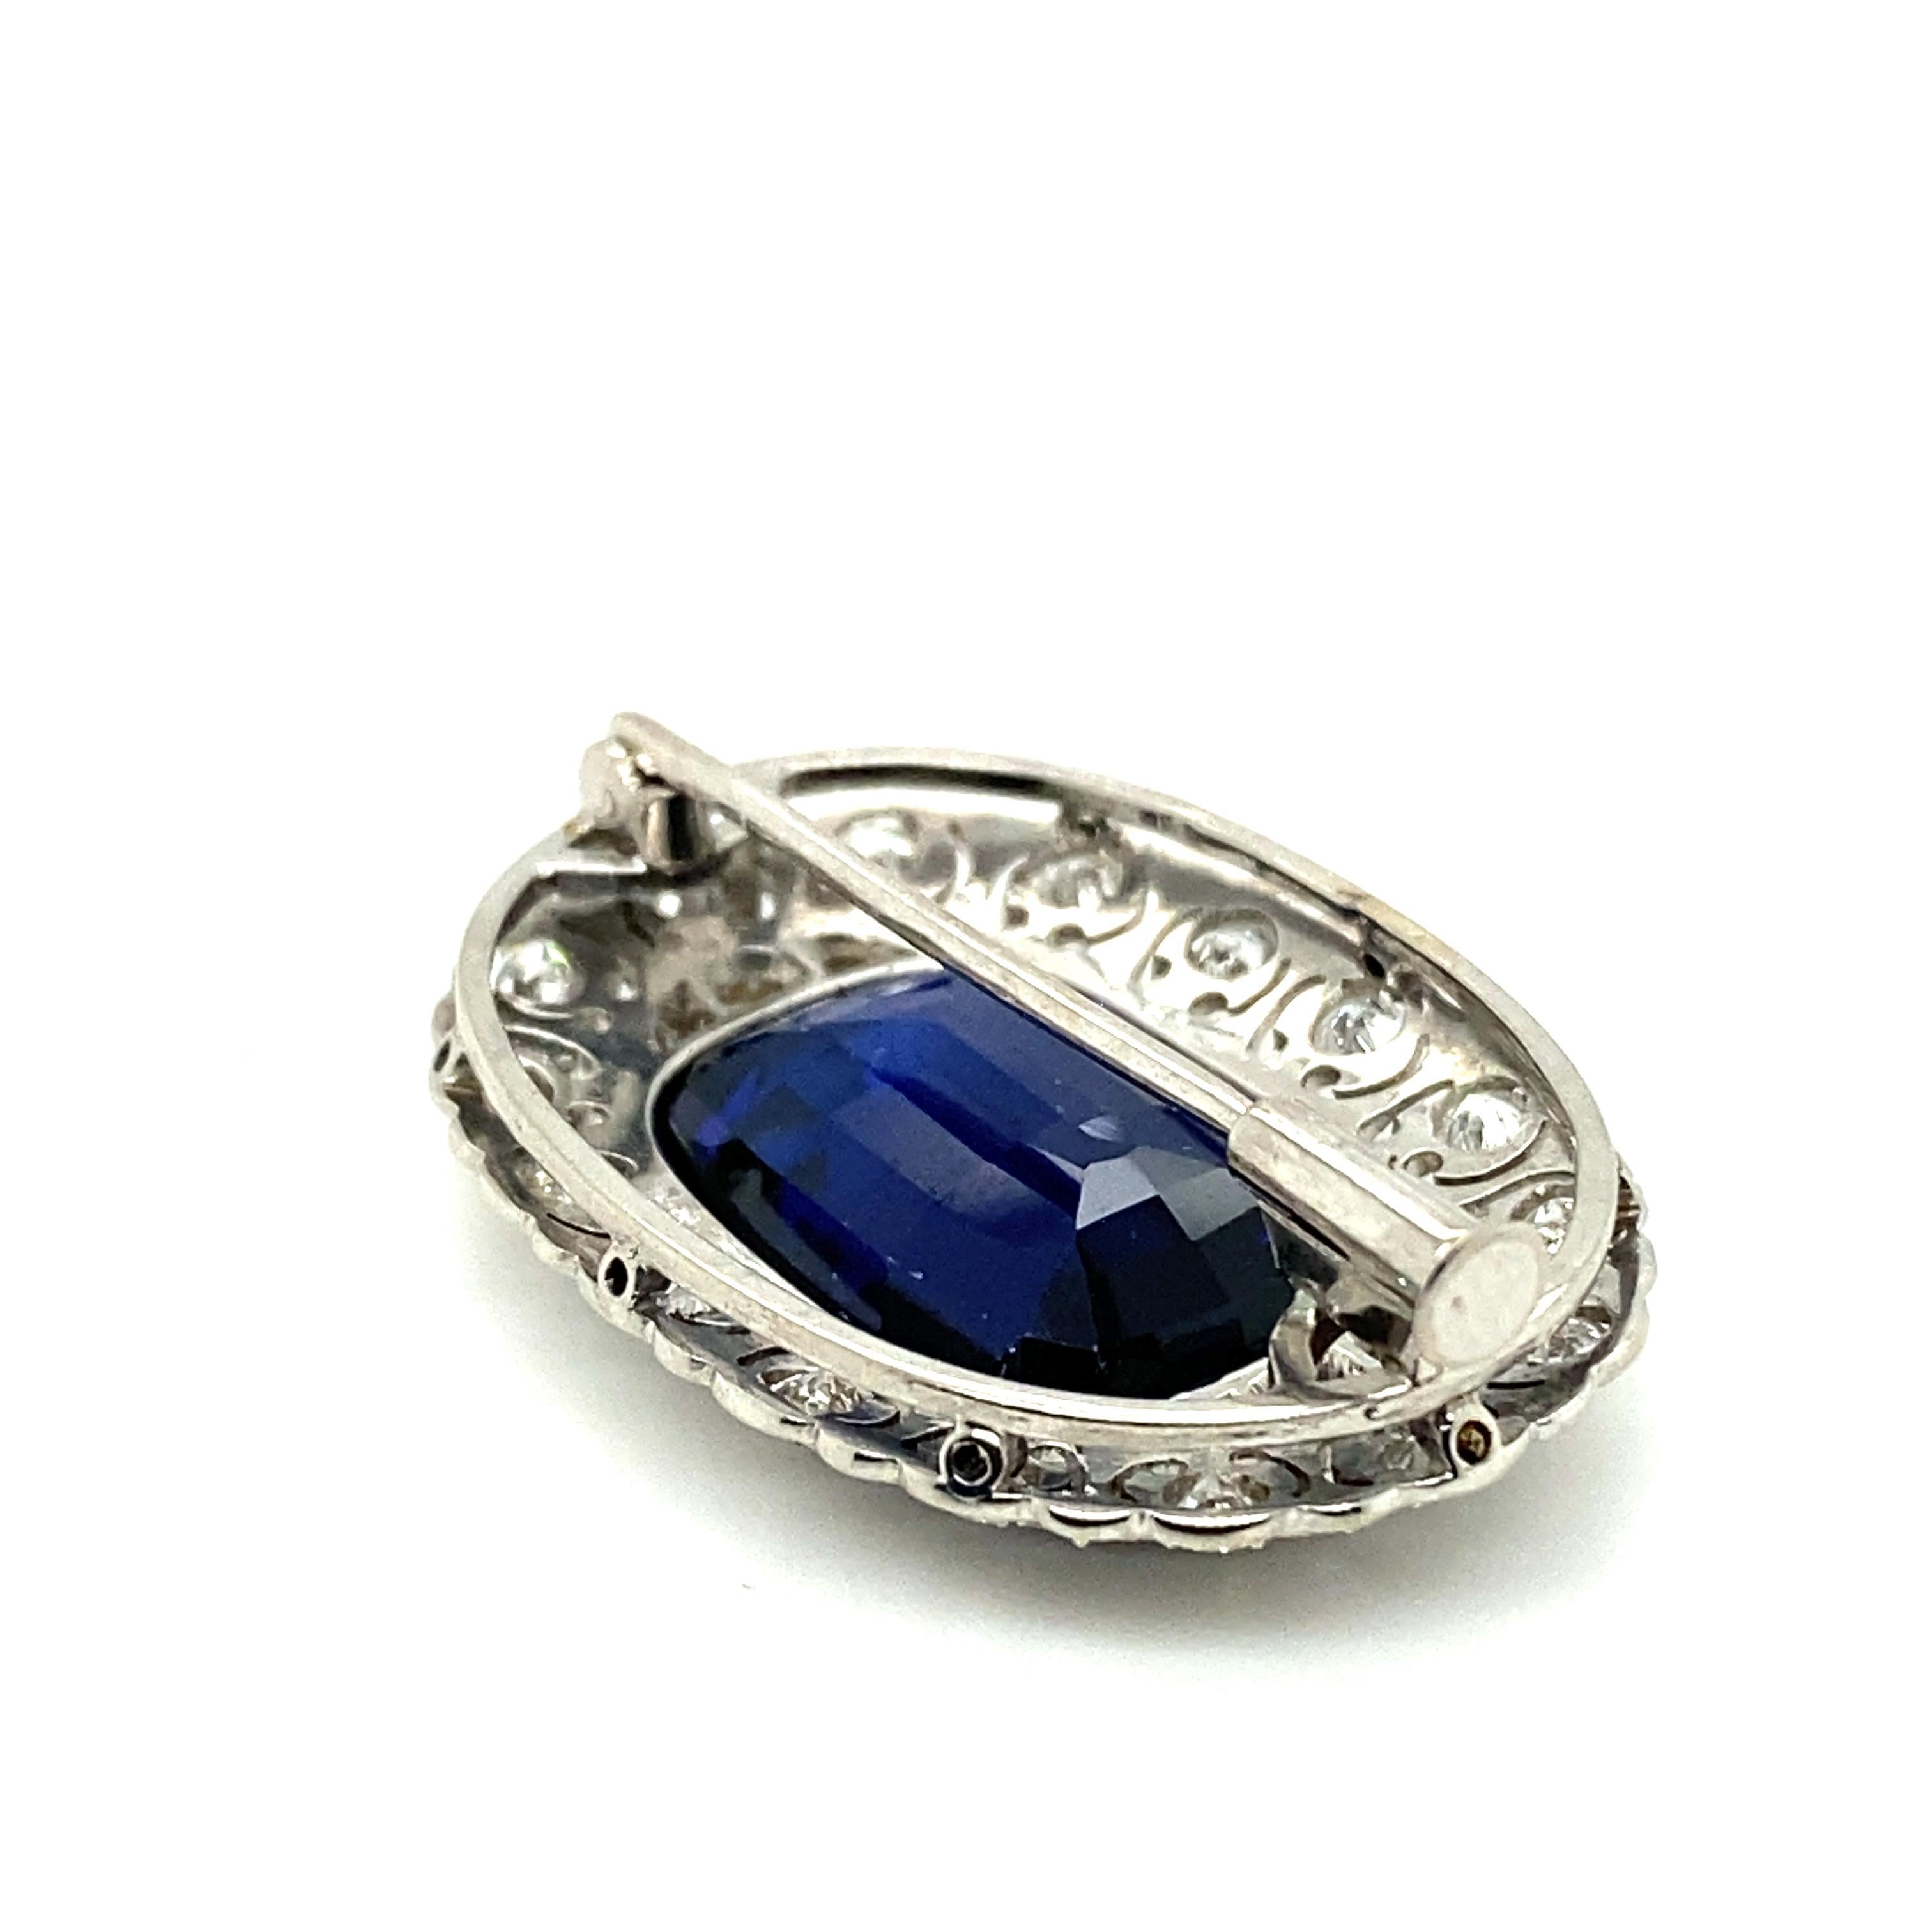 Diamond and Synthetic Sapphire Brooch in 14 Karat White Gold 3